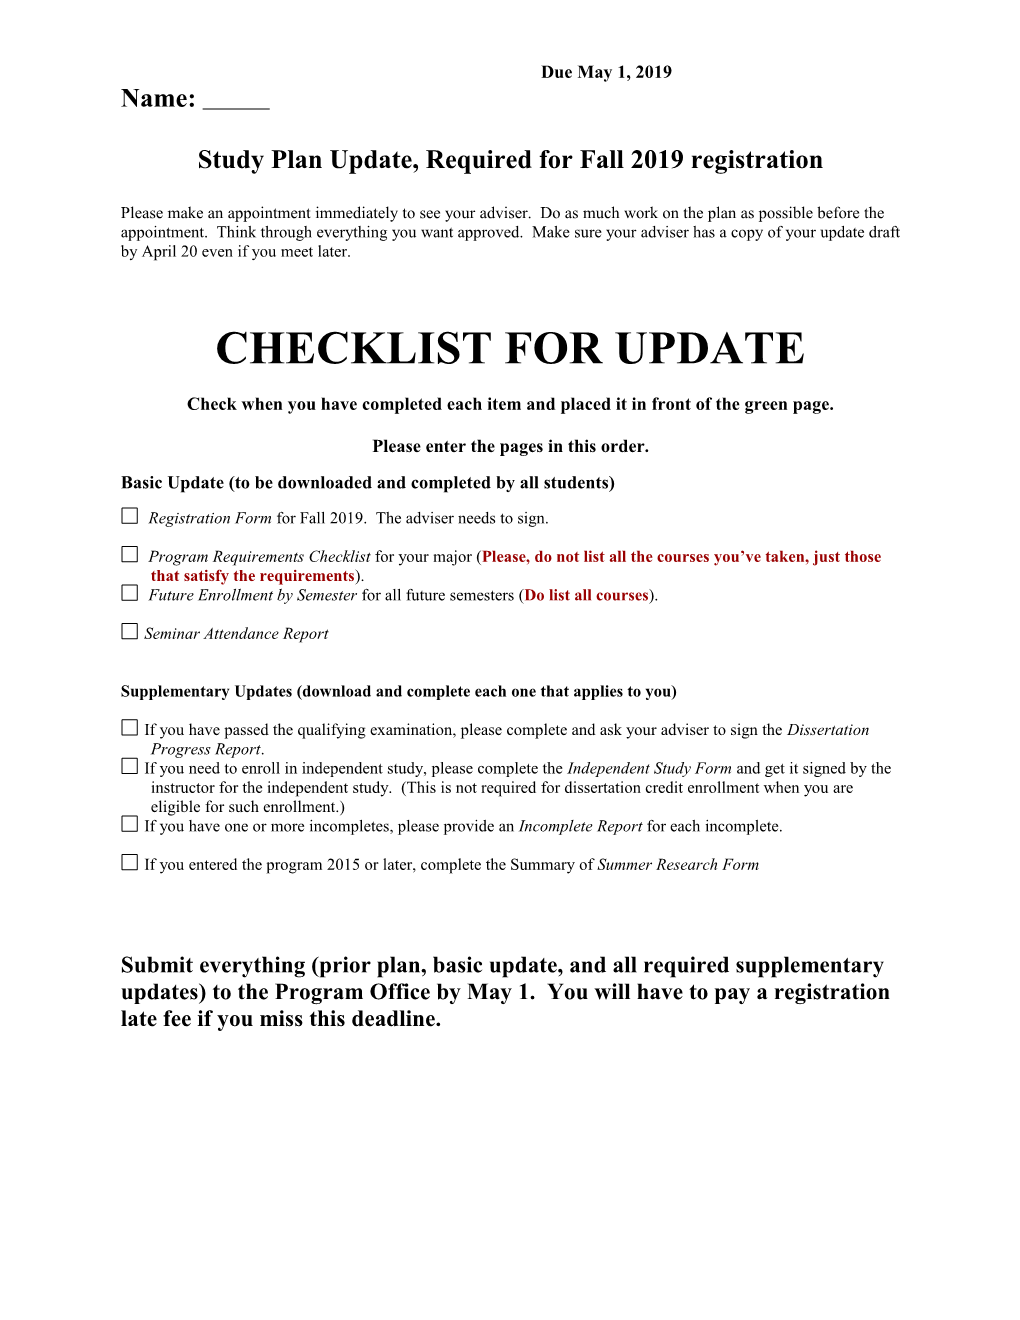 Study Plan Update, Required for Fall 2019 Registration